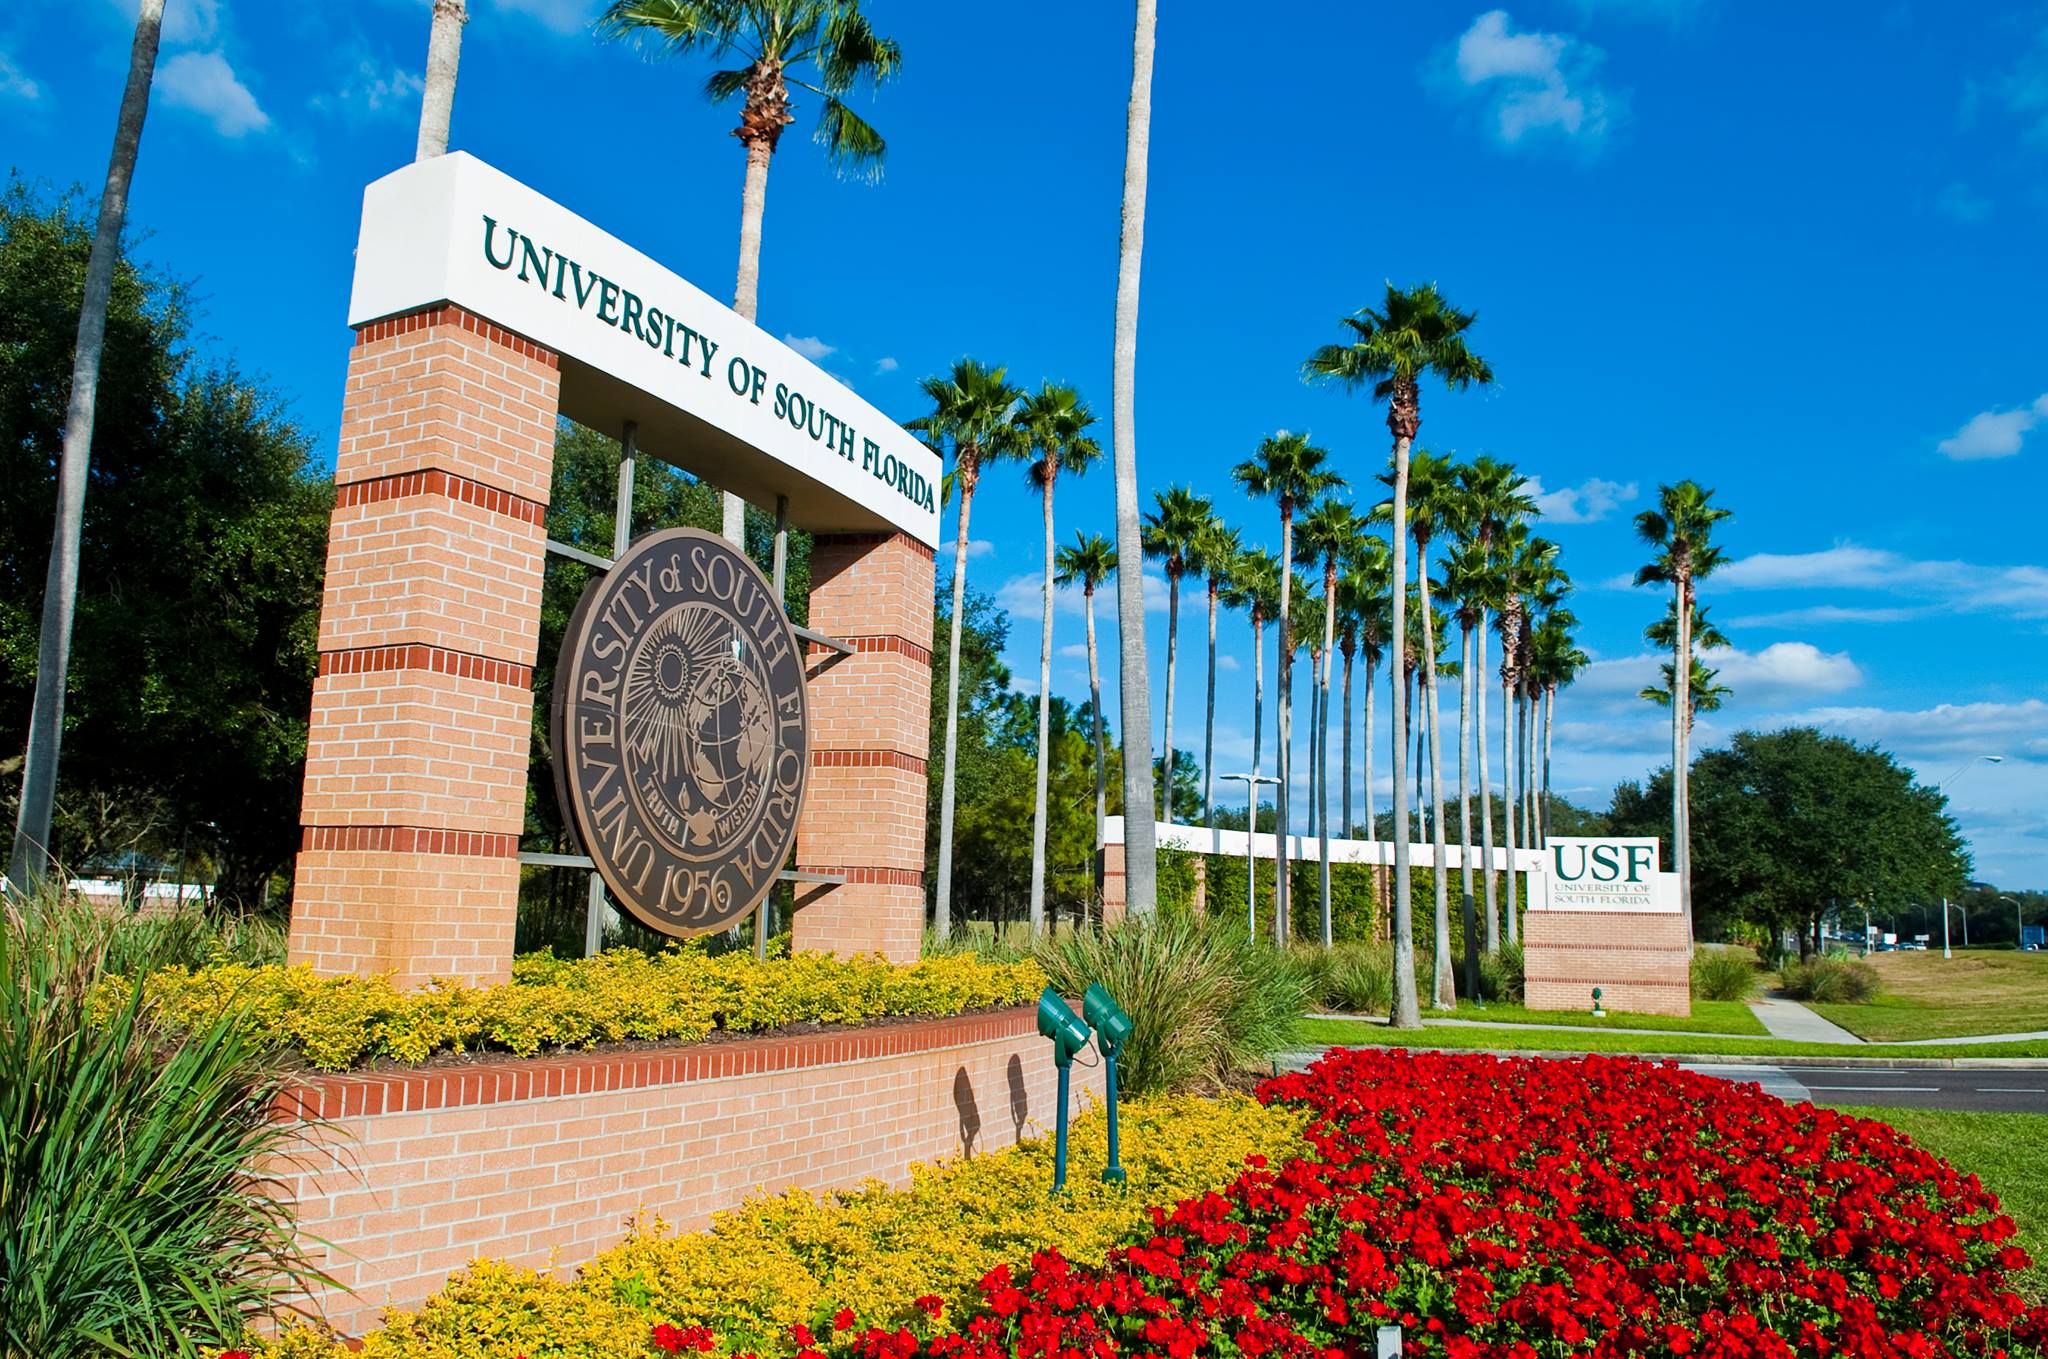 USF implements modified phase II of campus reopening plan